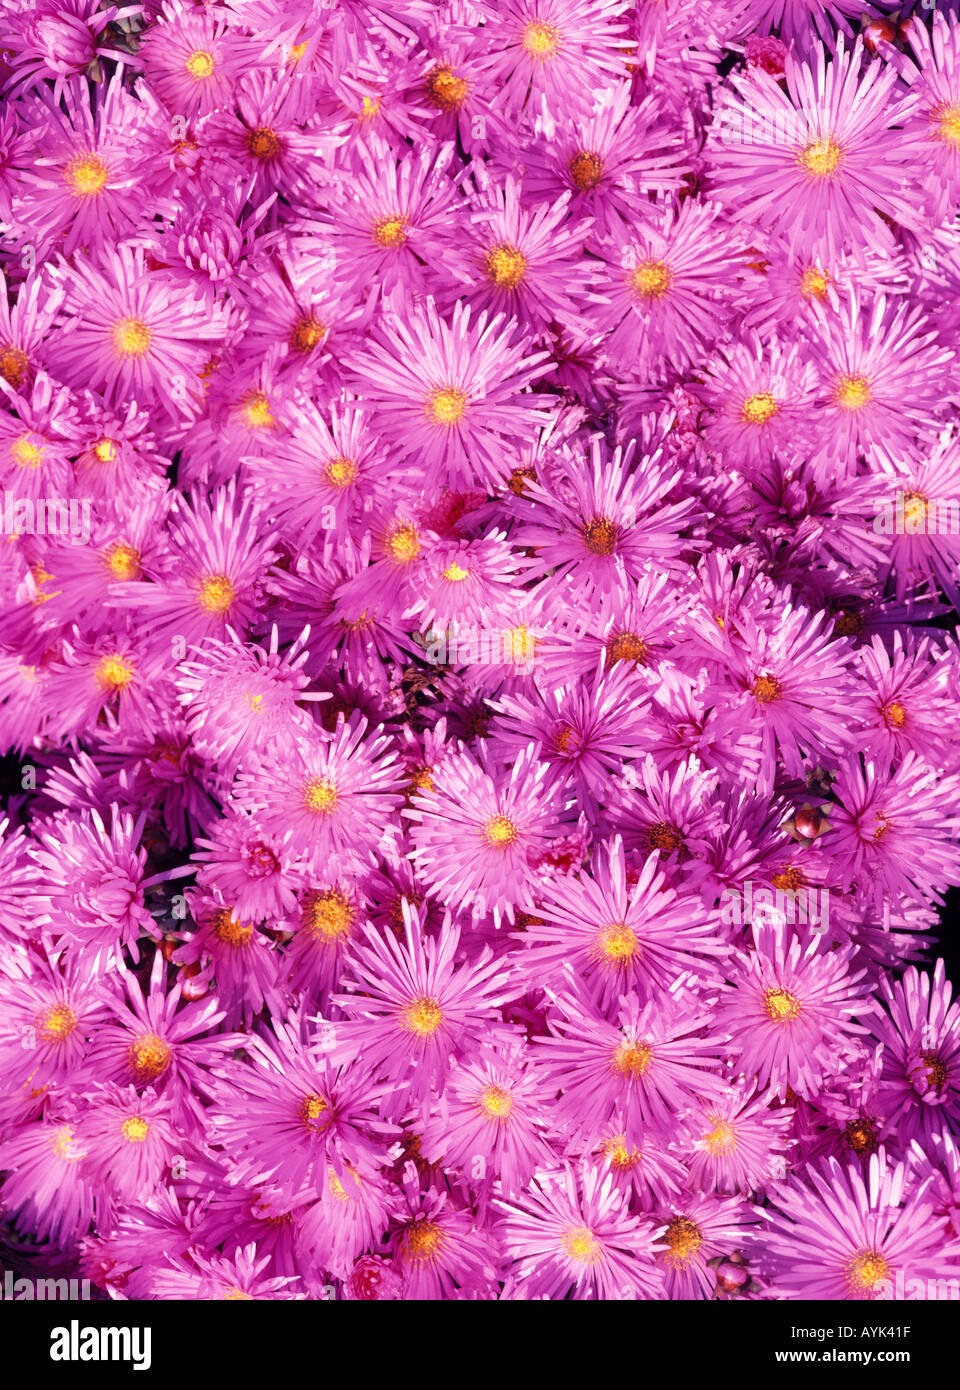 Pink Ice Plant flower blossoms Stock Photo